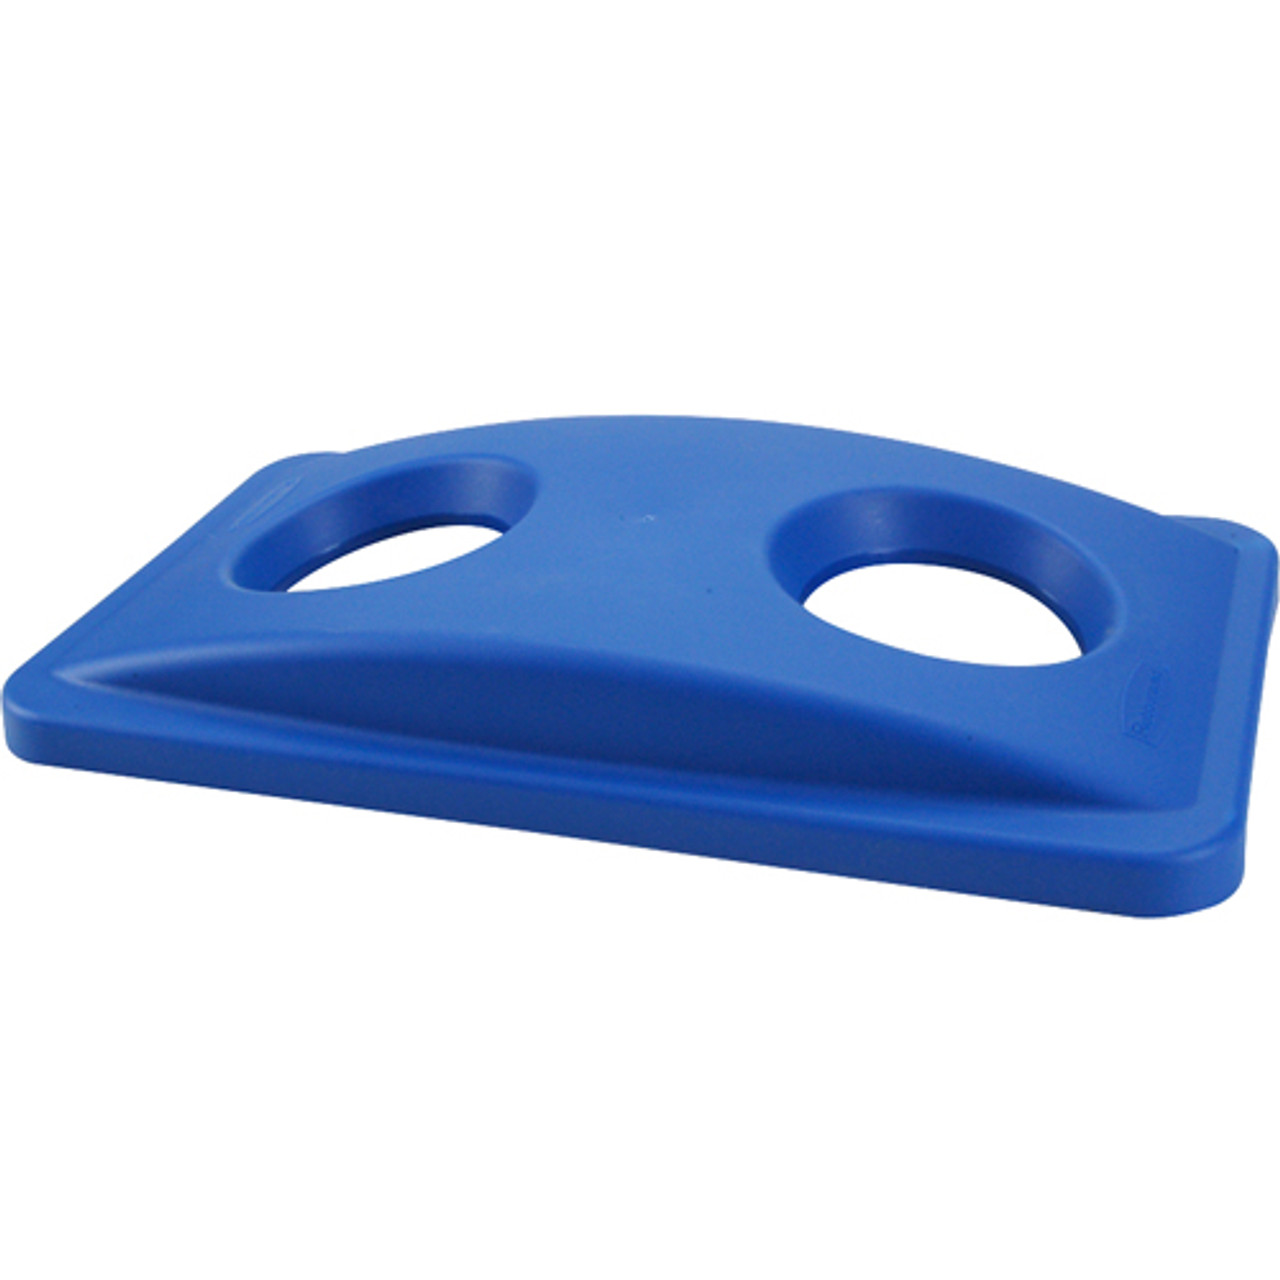 Recycling Can Lid/Top Blue, Bottles And Cans - Replacement Part For Rubbermaid RBMD269288BLUE